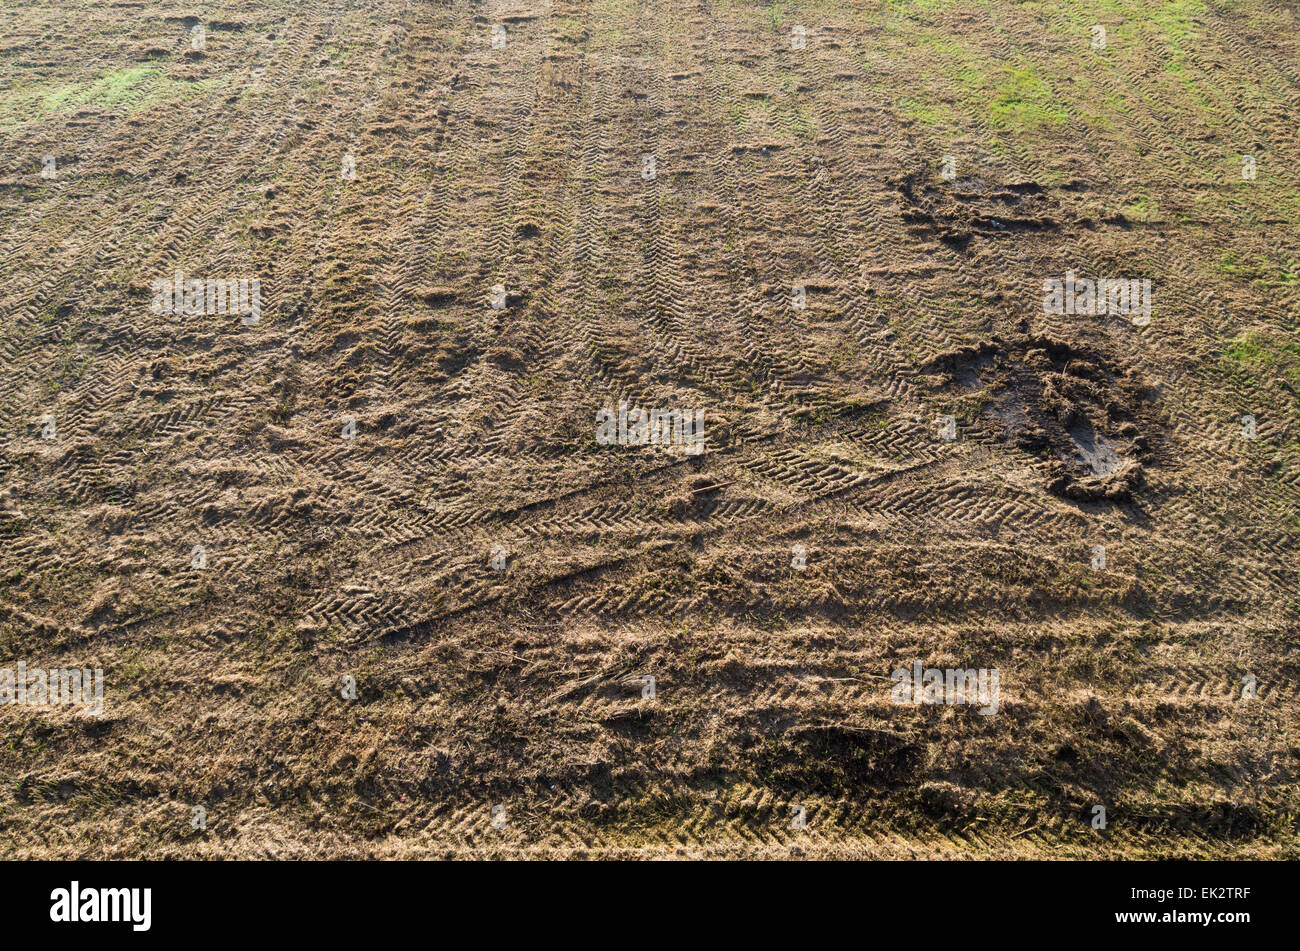 field with tractor traces seen from above Stock Photo